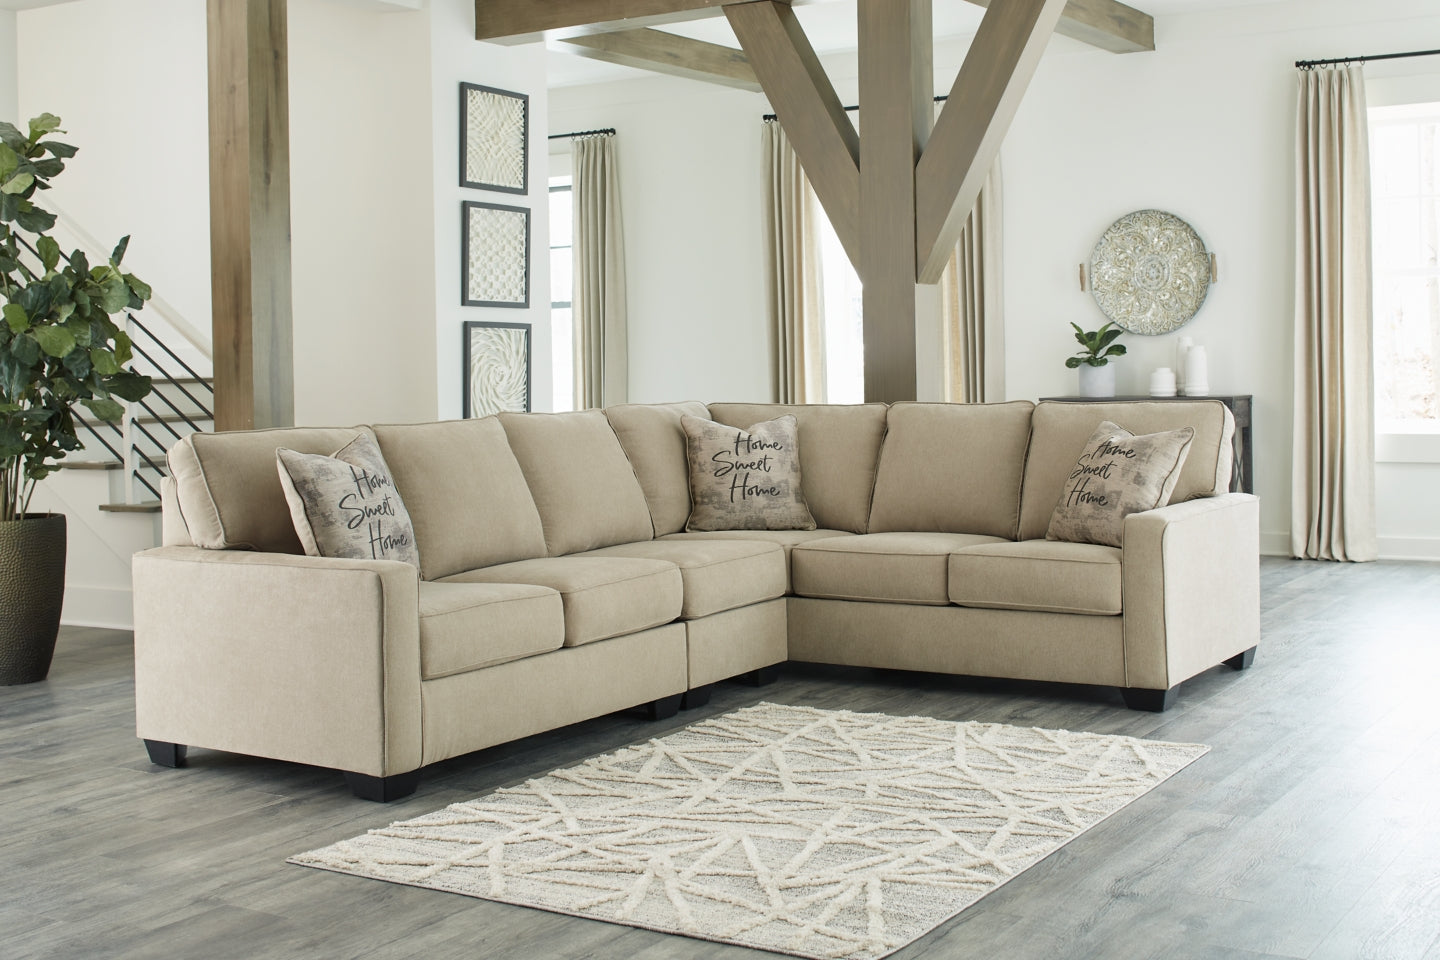 Lucina 3-Piece Sectional with Ottoman - PKG013136